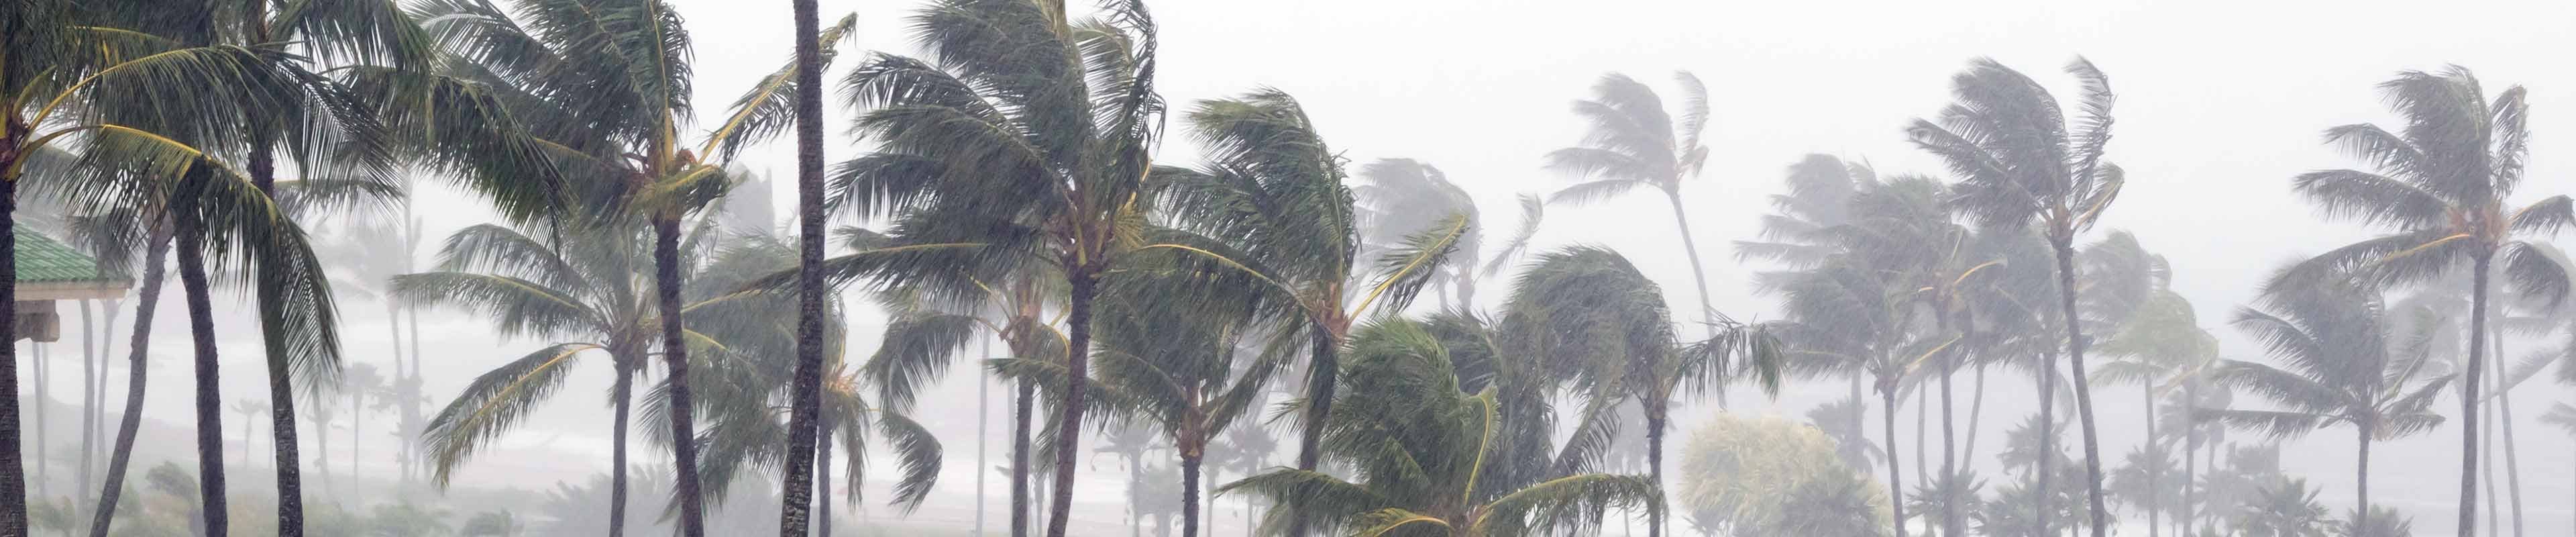 Palm trees blowing in a heavy rain during a hurricane.